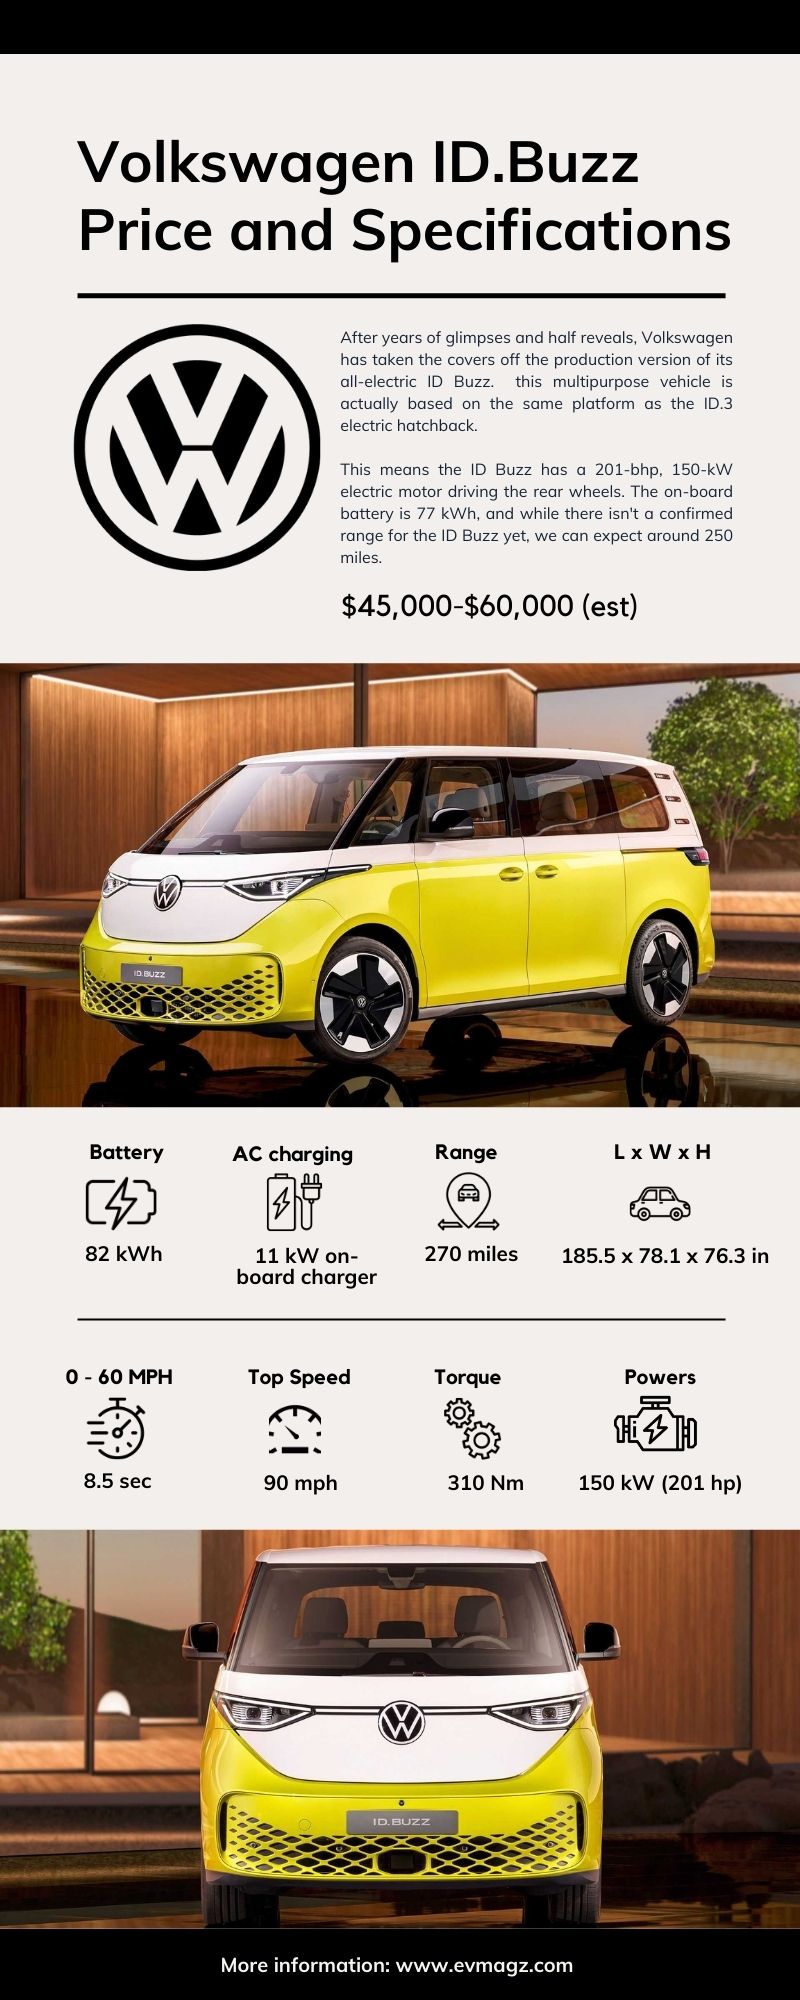 Volkswagen ID.Buzz Price and Specifications Infographic